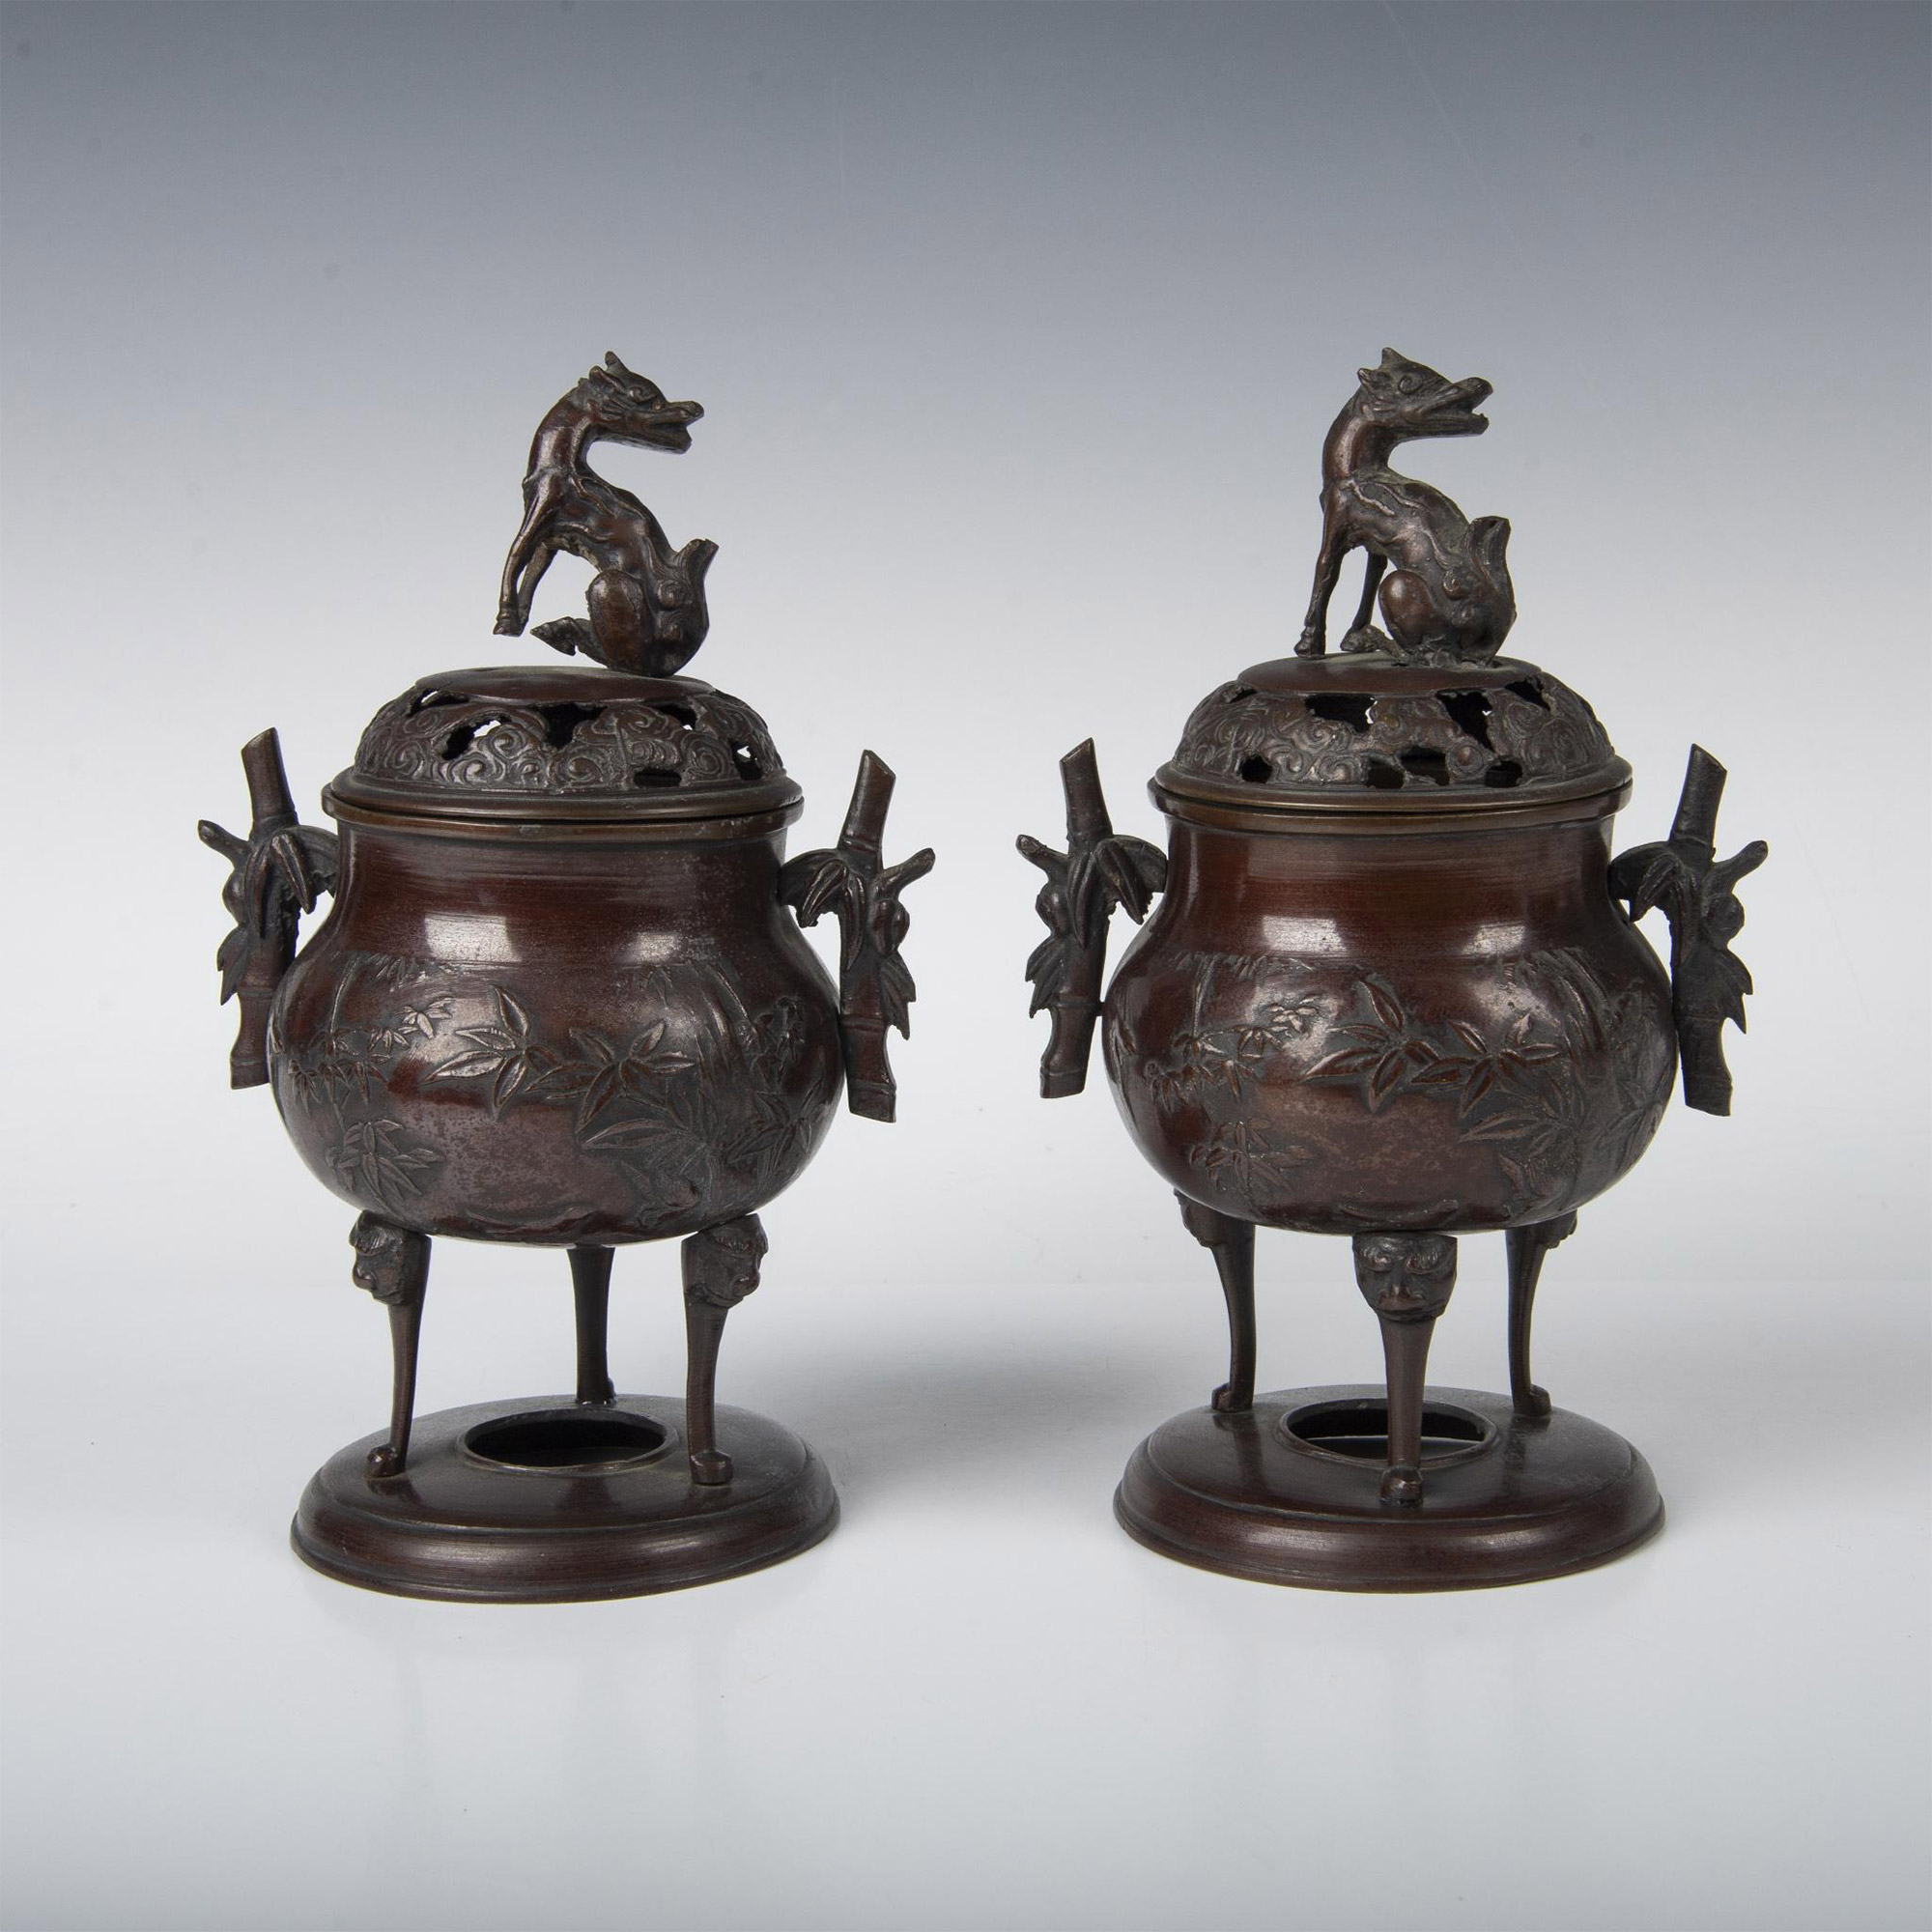 Pair of Antique Chinese Bronze Censers - Image 4 of 6